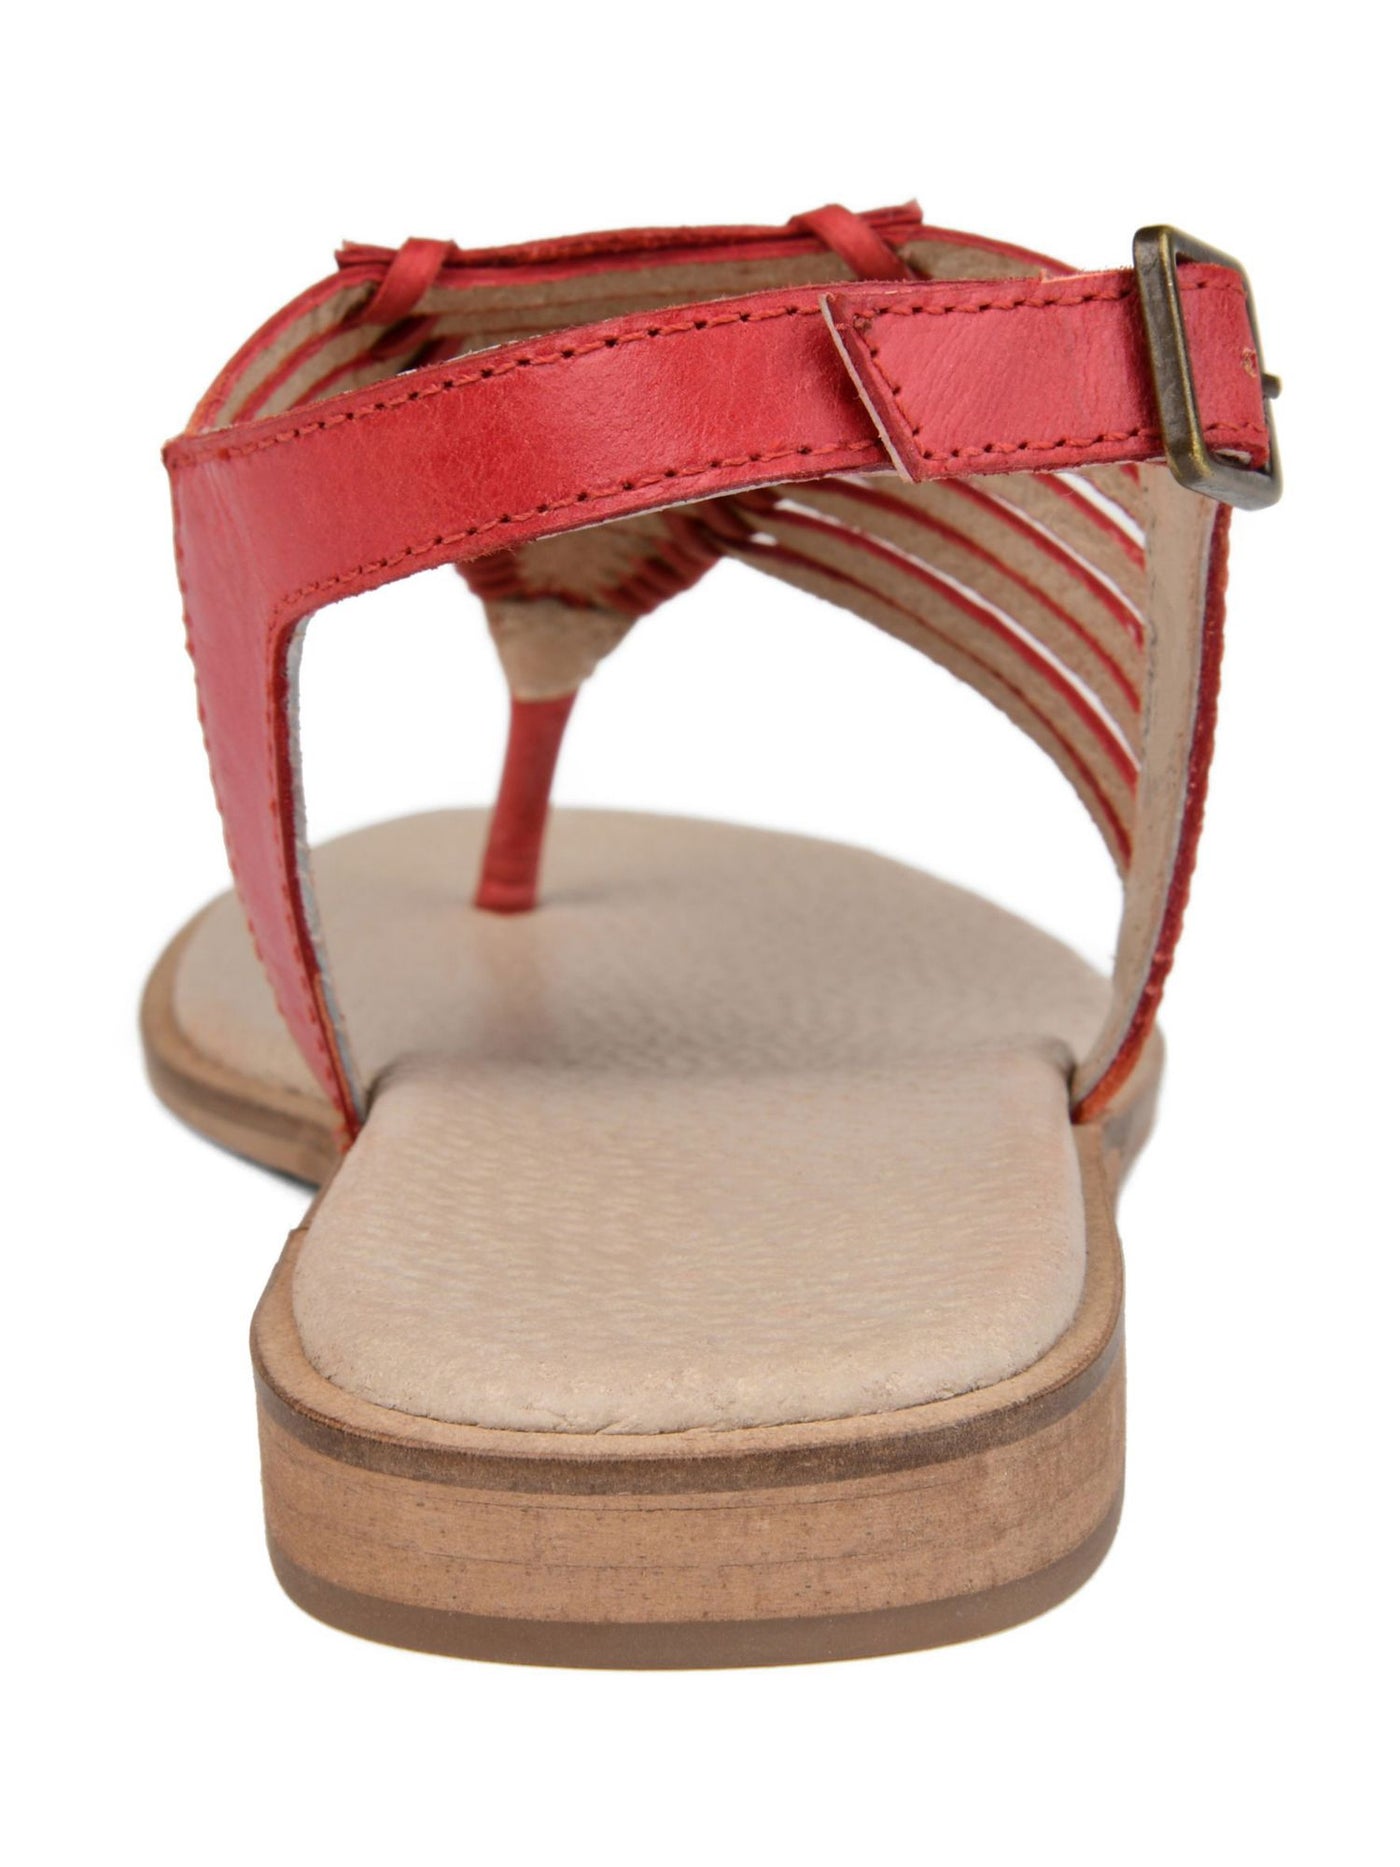 JOURNEE COLLECTION Womens Red 1/2" Wedge Fishbone Detail Traction Sole Cushioned Adjustable Strap Davis Round Toe Wedge Buckle Leather Slingback Sandal 7.5 M